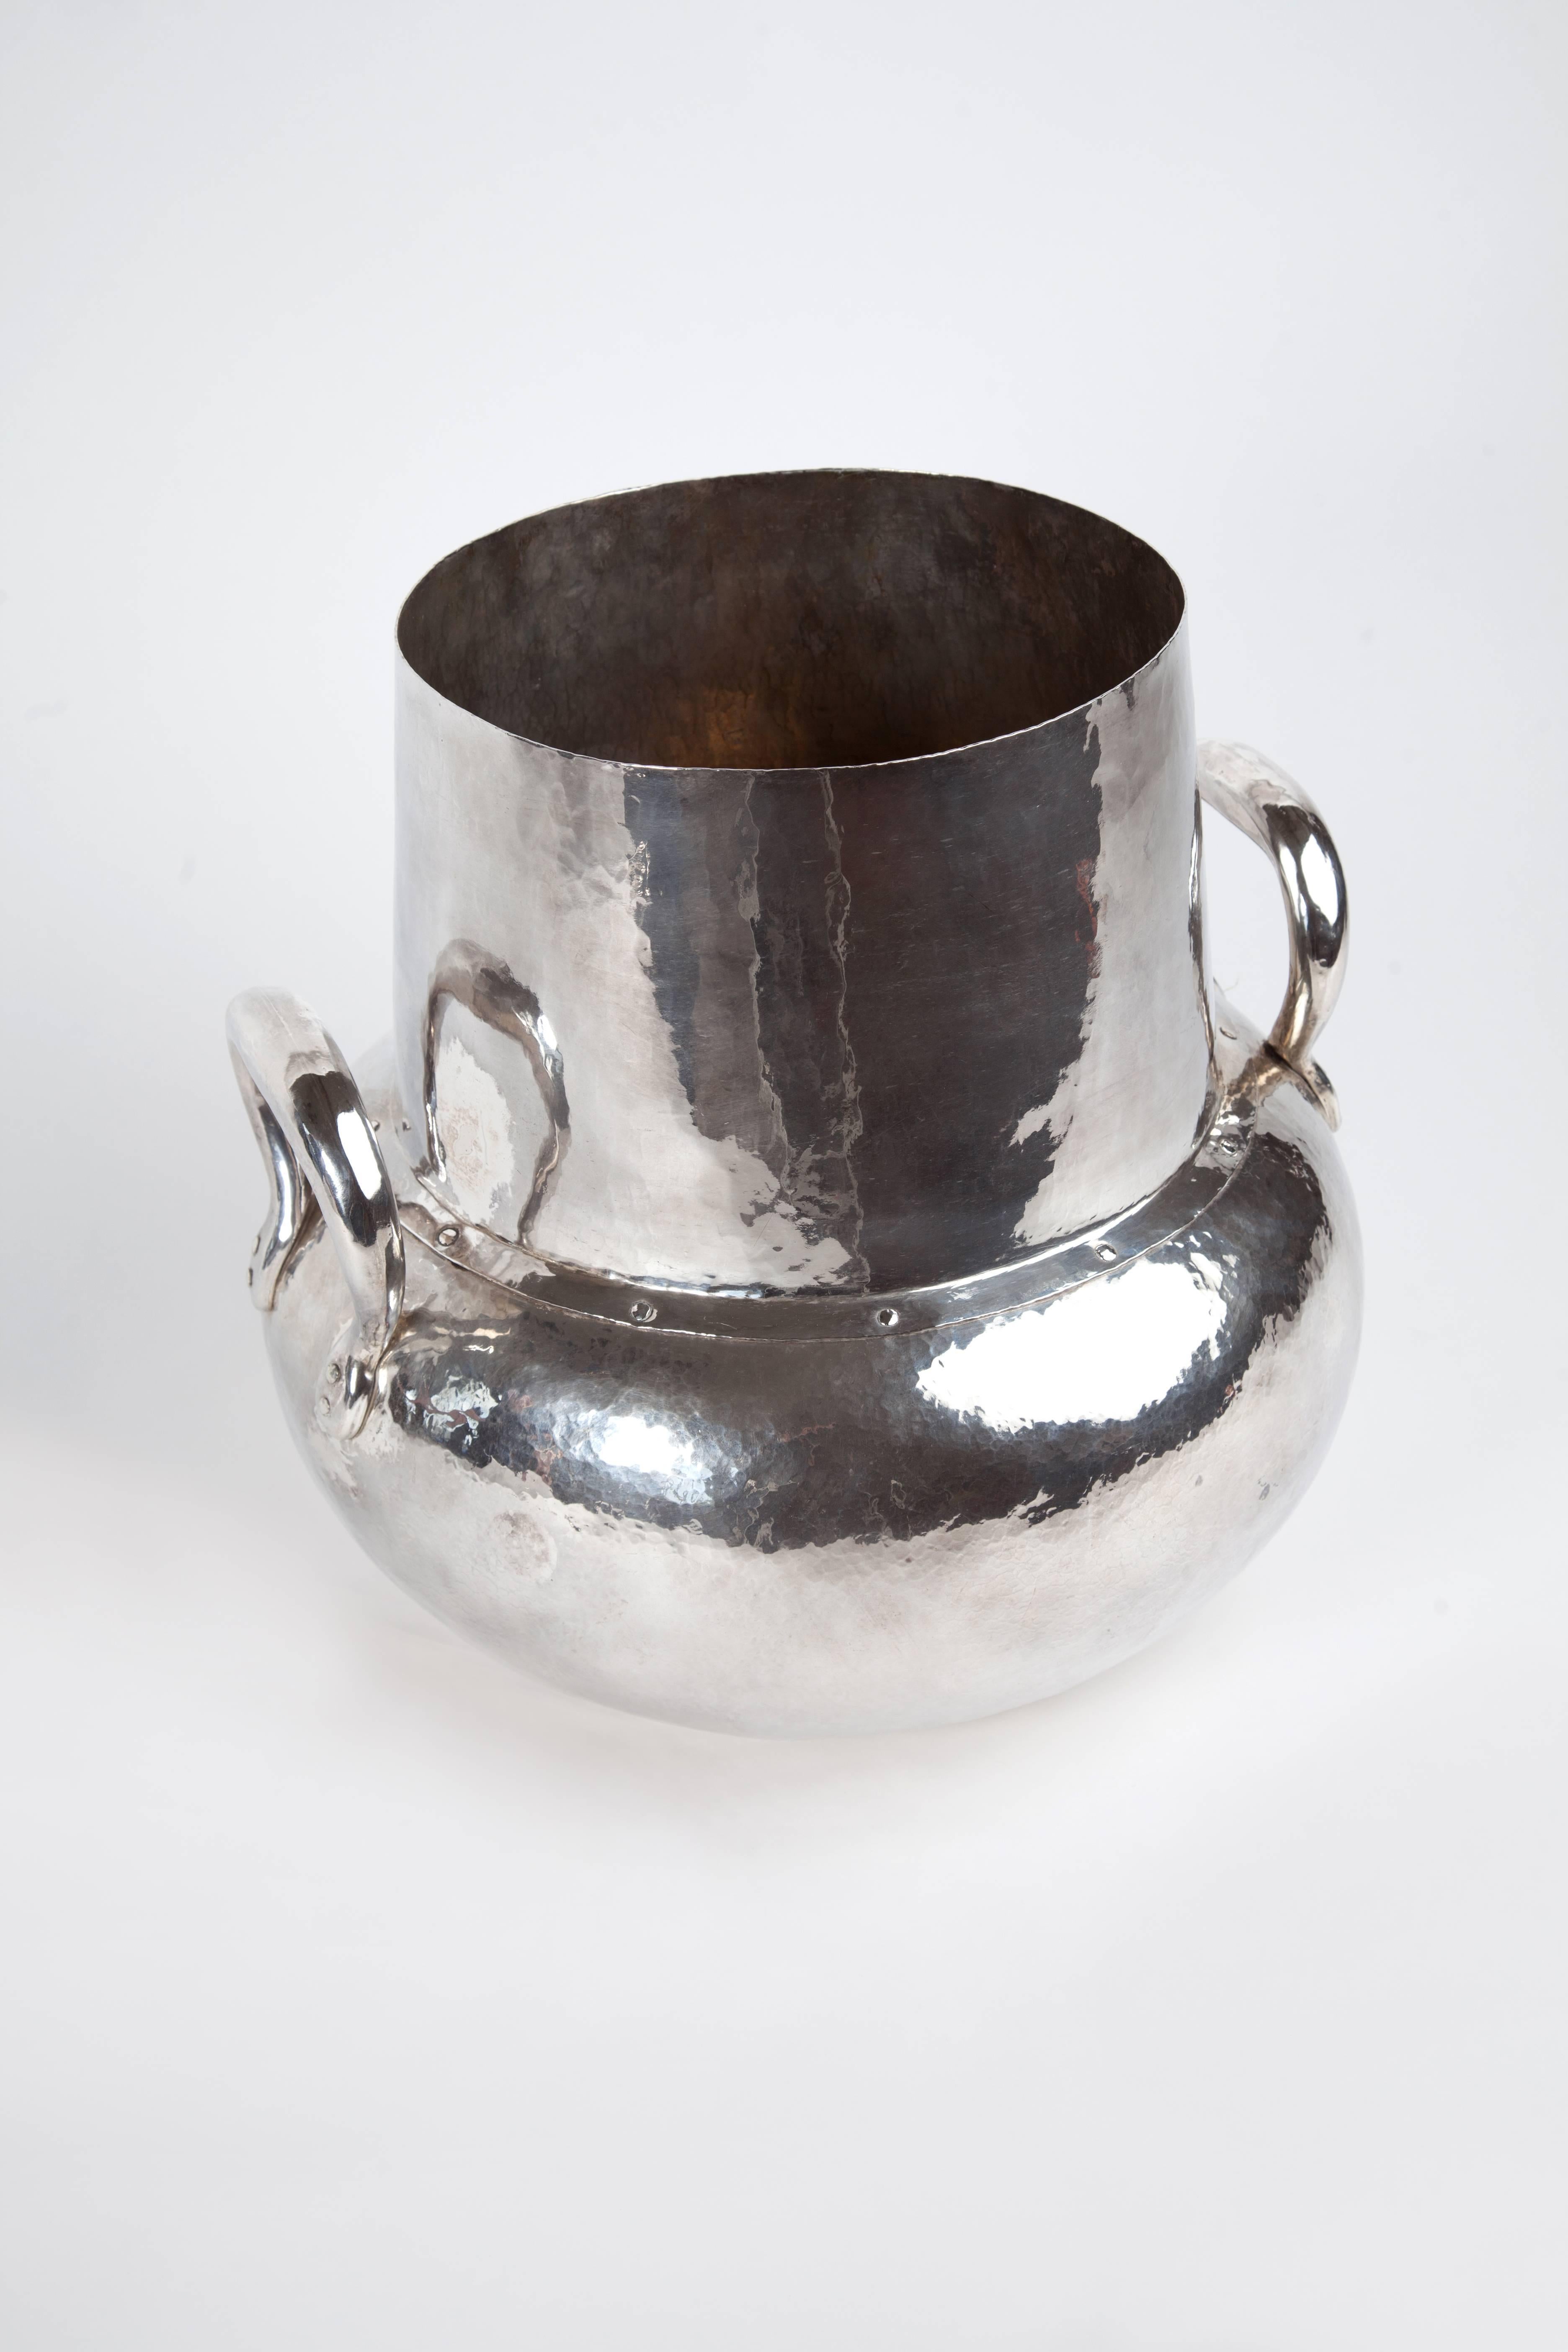 Large sterling silver hand-hammered Olla with two handles. This is a one of a kind piece from Bolivia.